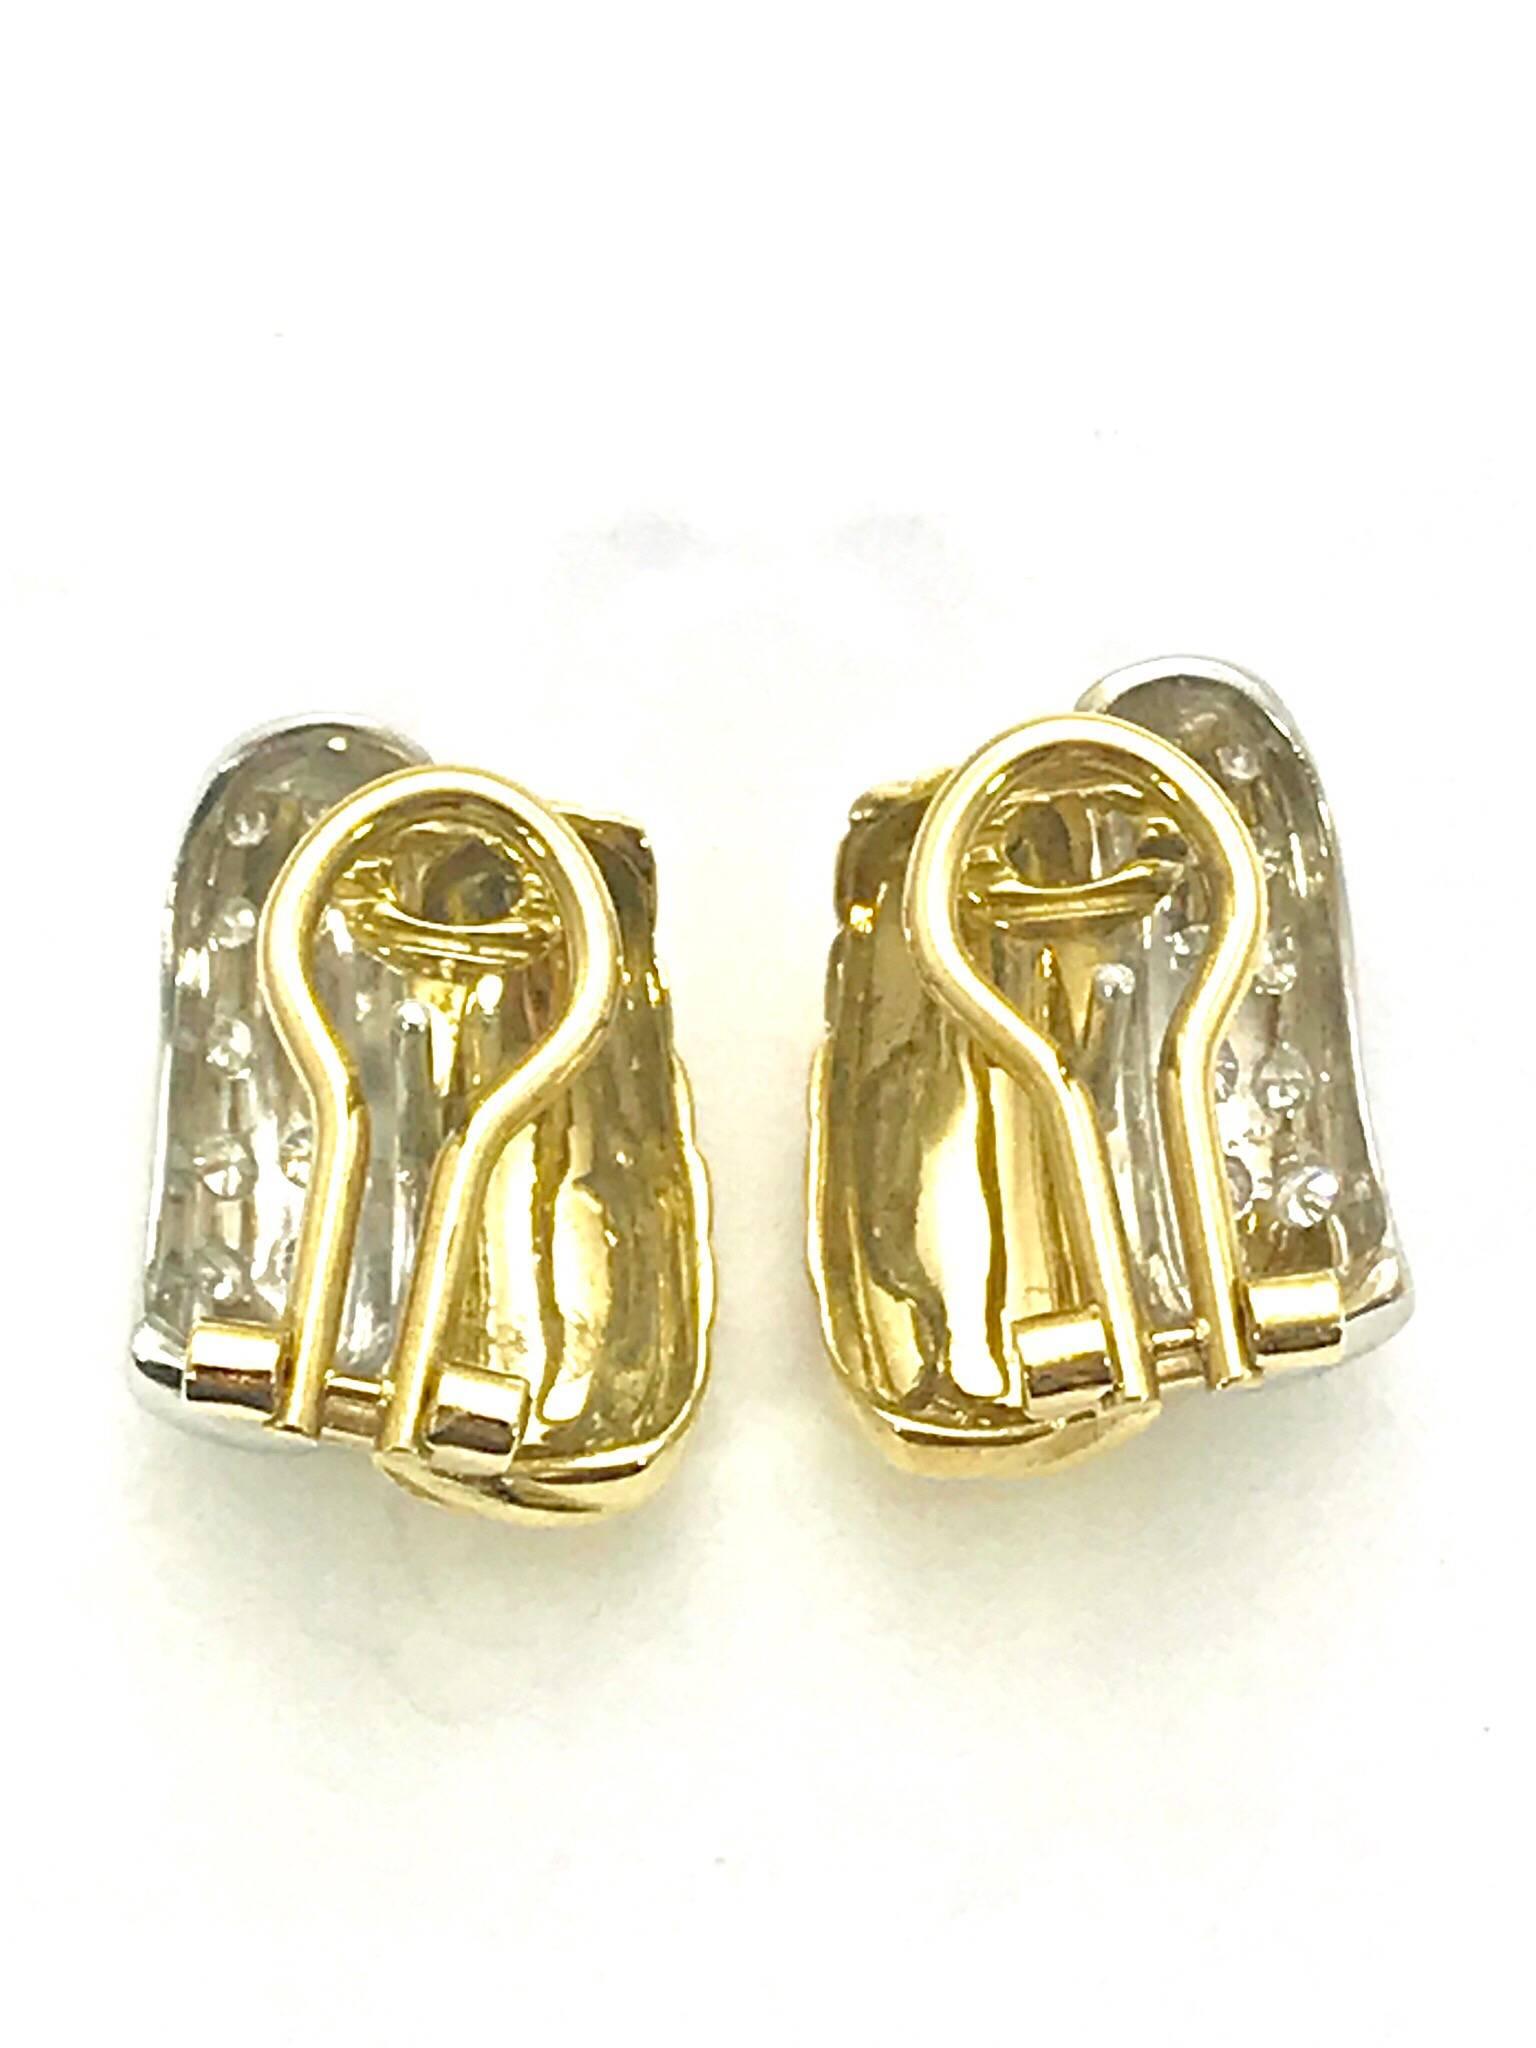 Diamond and 18 karat white and yellow gold clip and post earrings.  There are 24 round brilliant diamonds that are G color, VS clarity, with a total weight of .50 carats set in white gold.  

Hallmark:  750